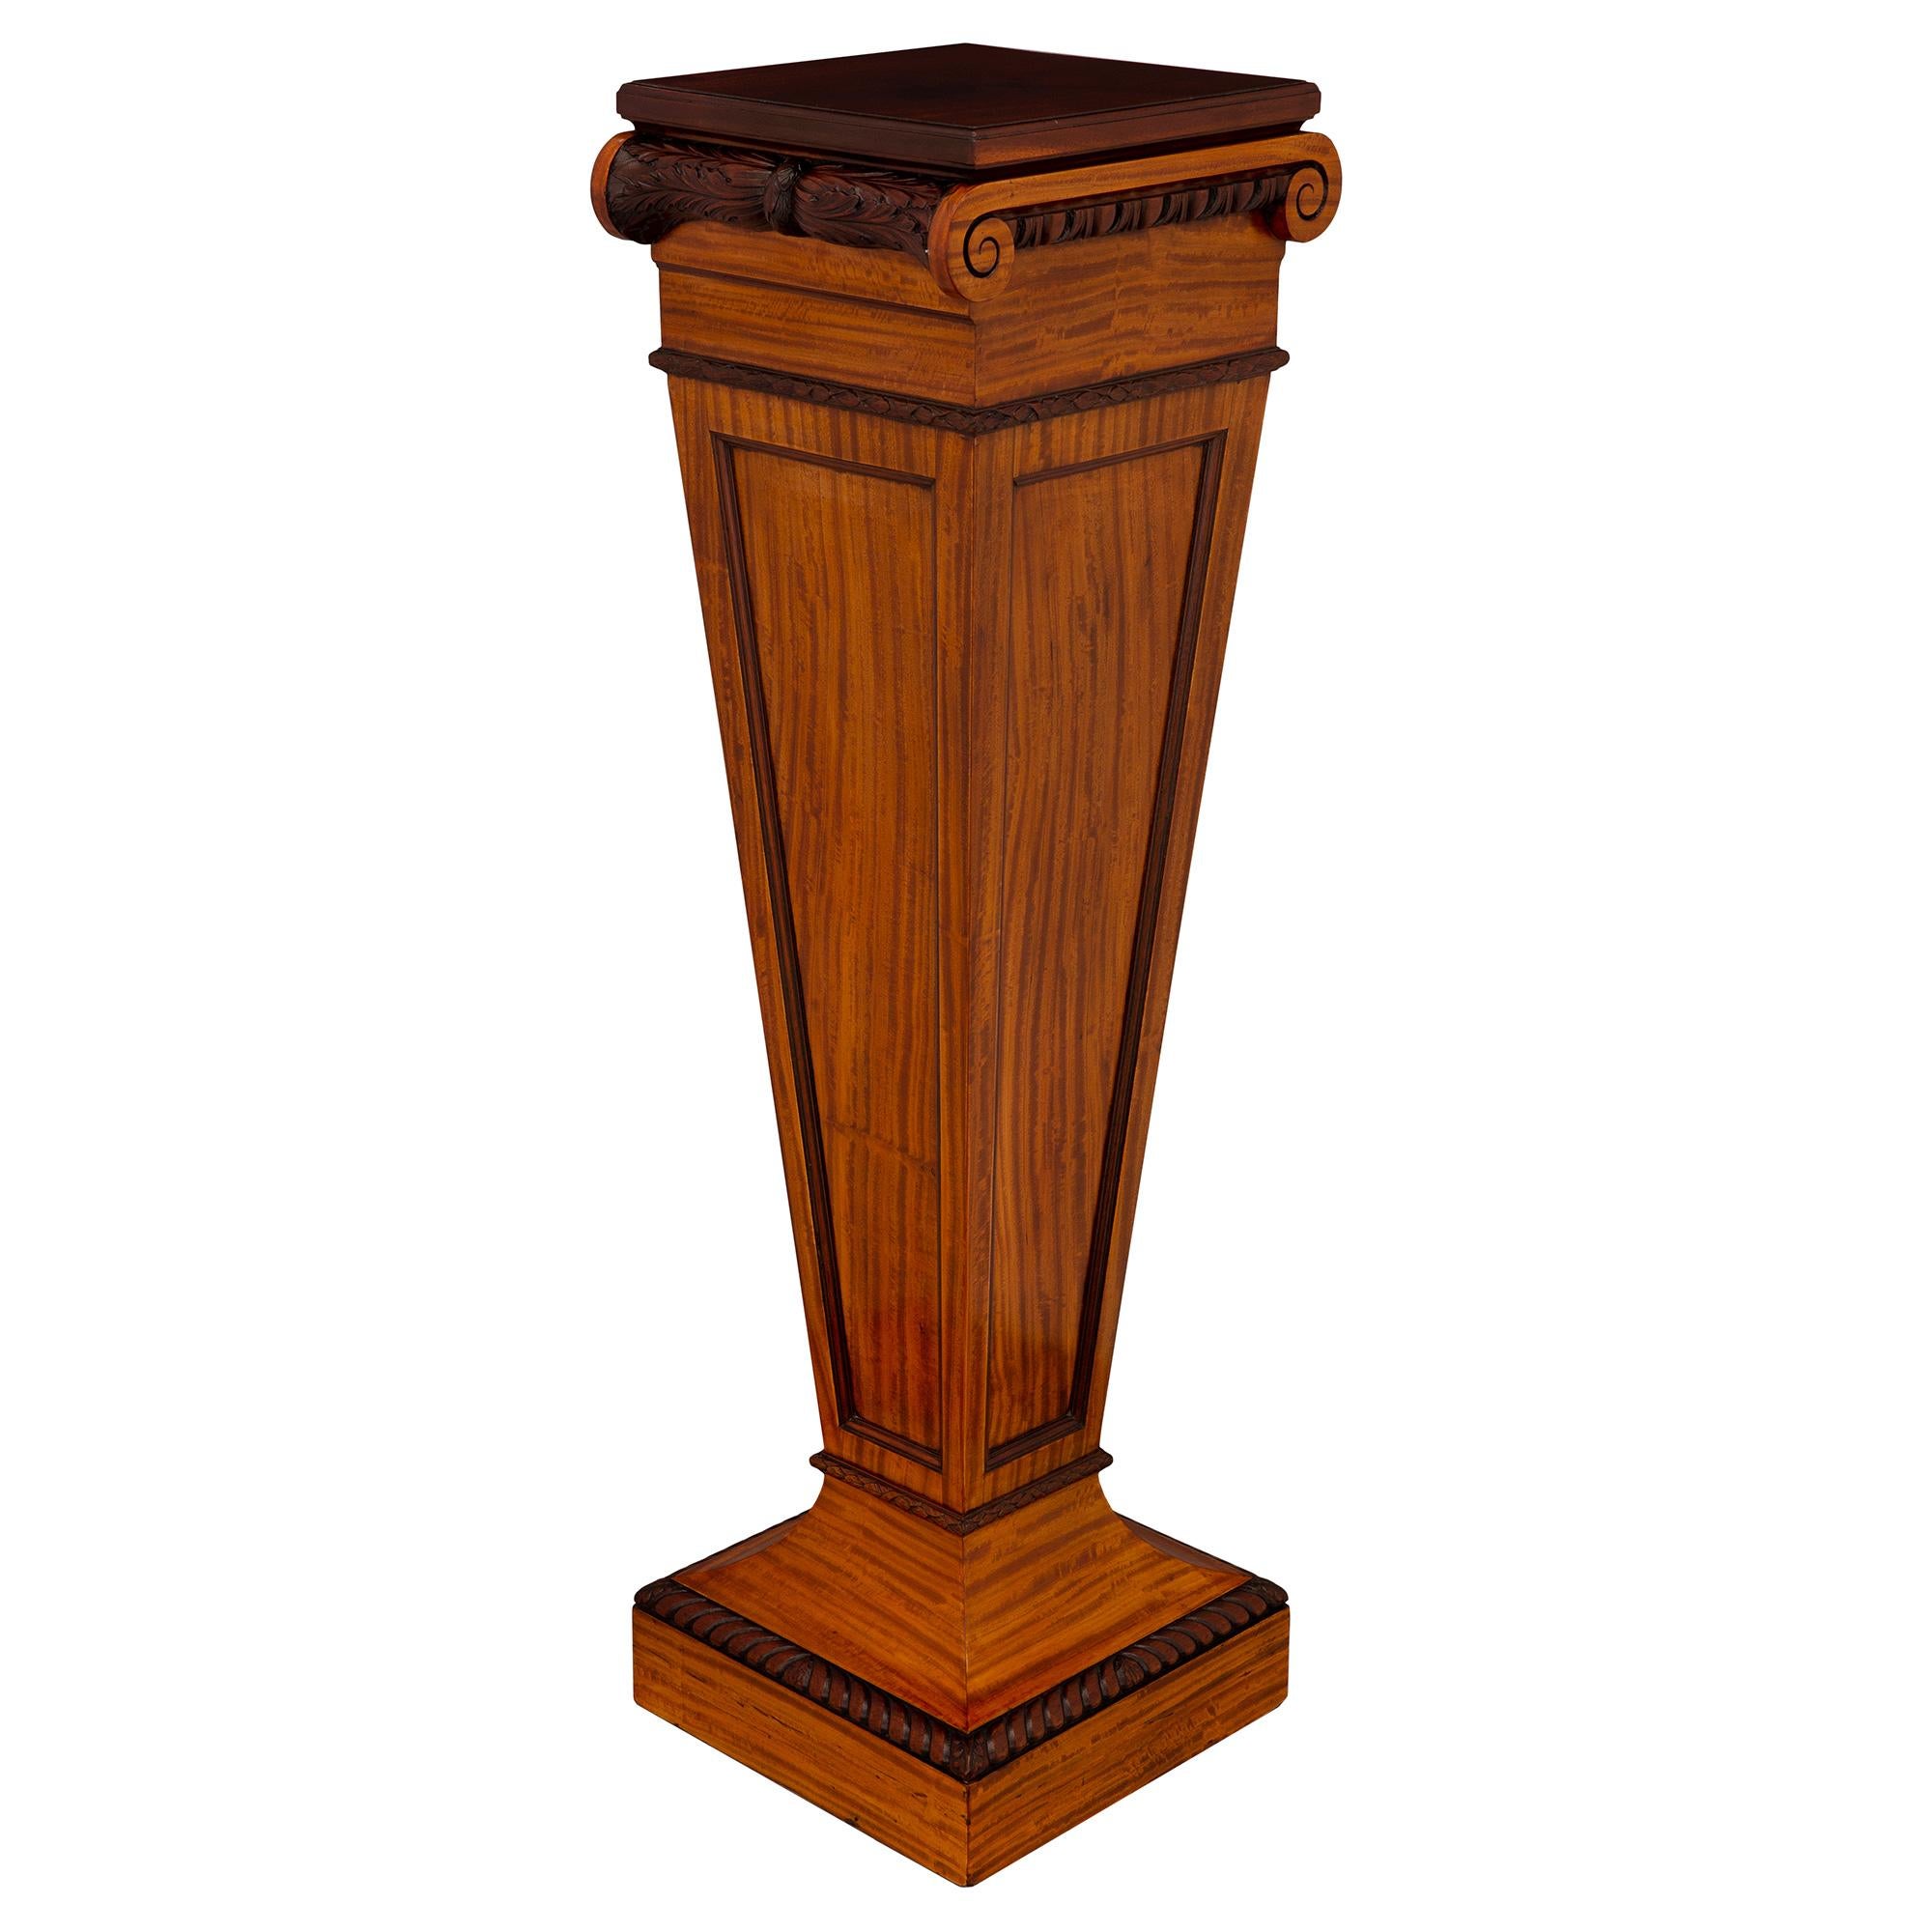 English 19th Century Regency Style Satinwood Pedestal Column In Good Condition For Sale In West Palm Beach, FL